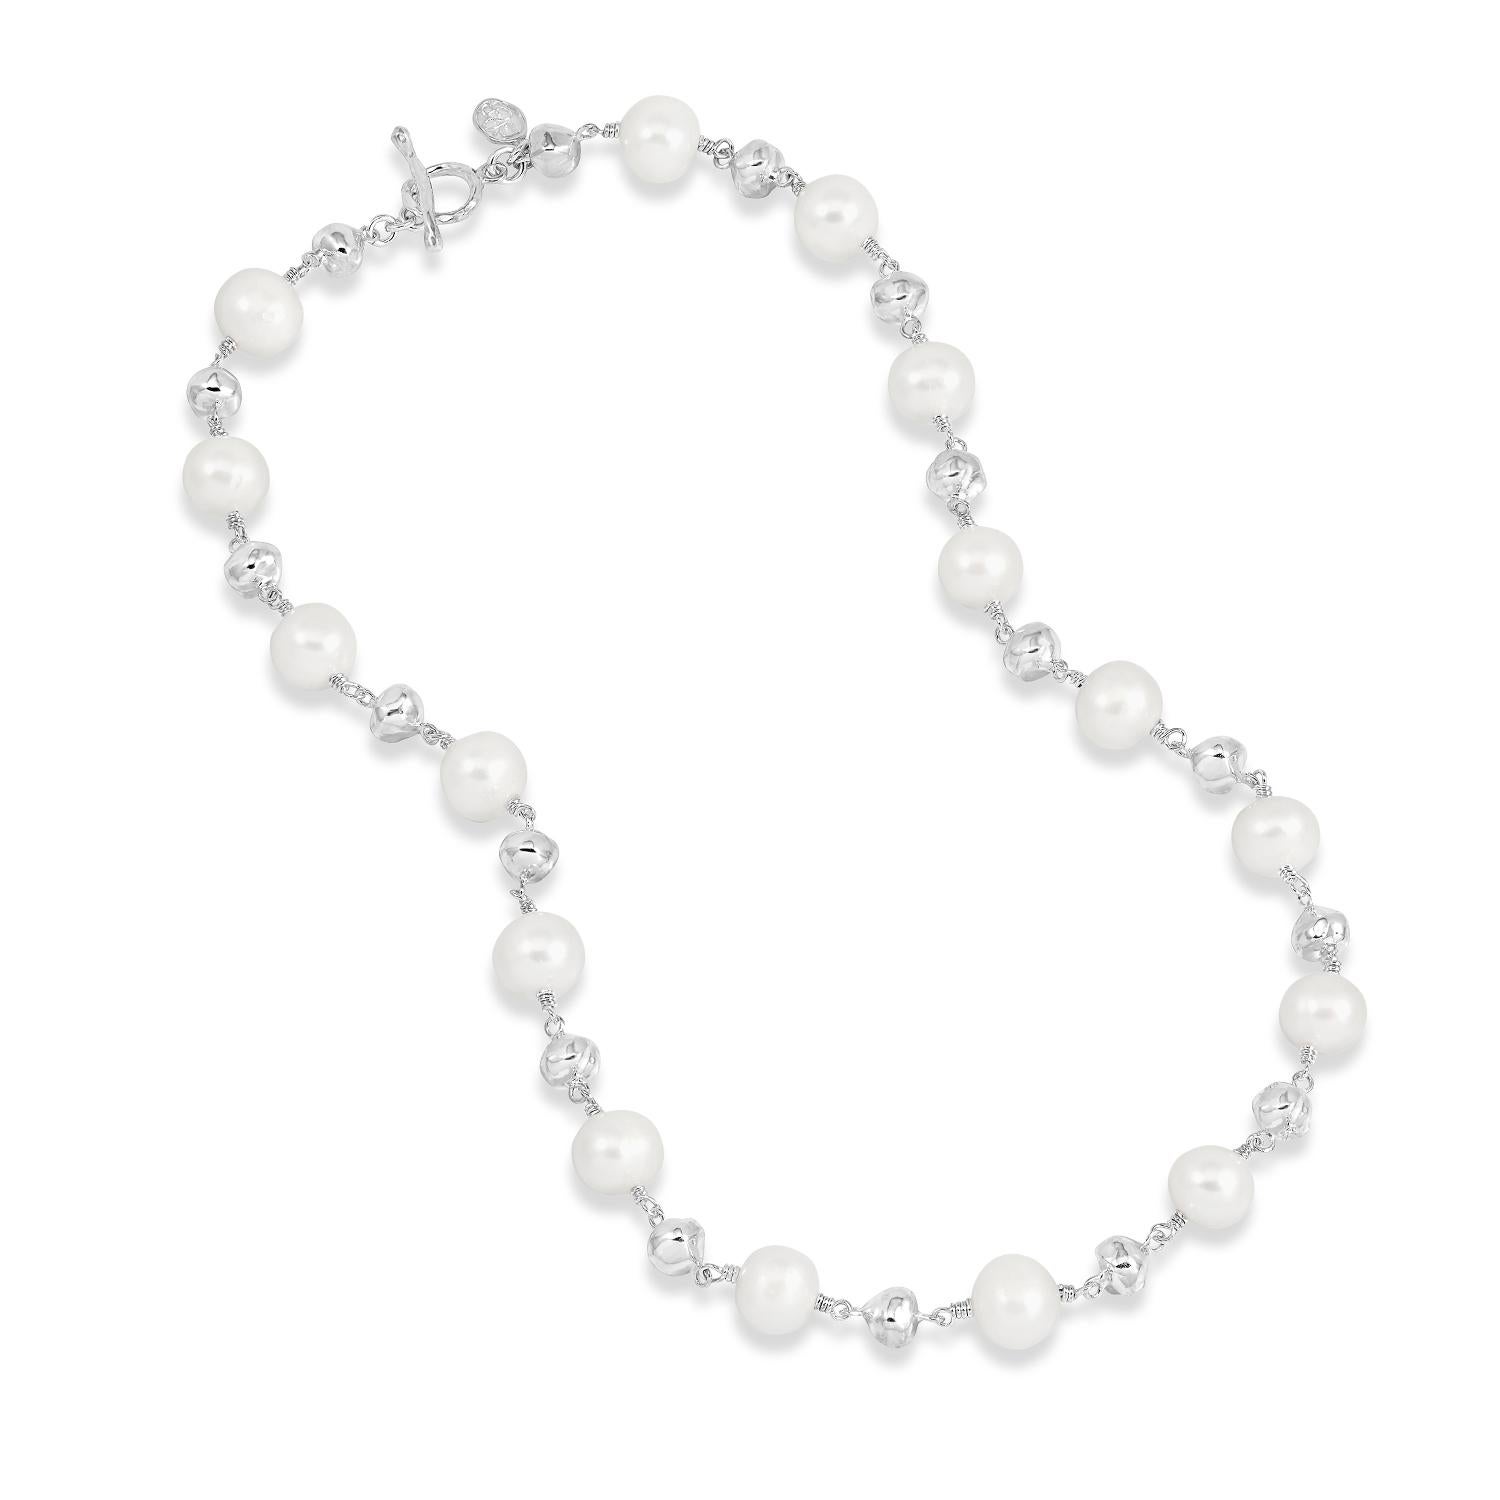 From our Luna Pearls range, this necklace features white cultured freshwater pearls interspaced with sterling silver nuggets. The 5mm nuggets have a soft beaten finish, giving the necklace an organic yet contemporary feel. The necklace is finished